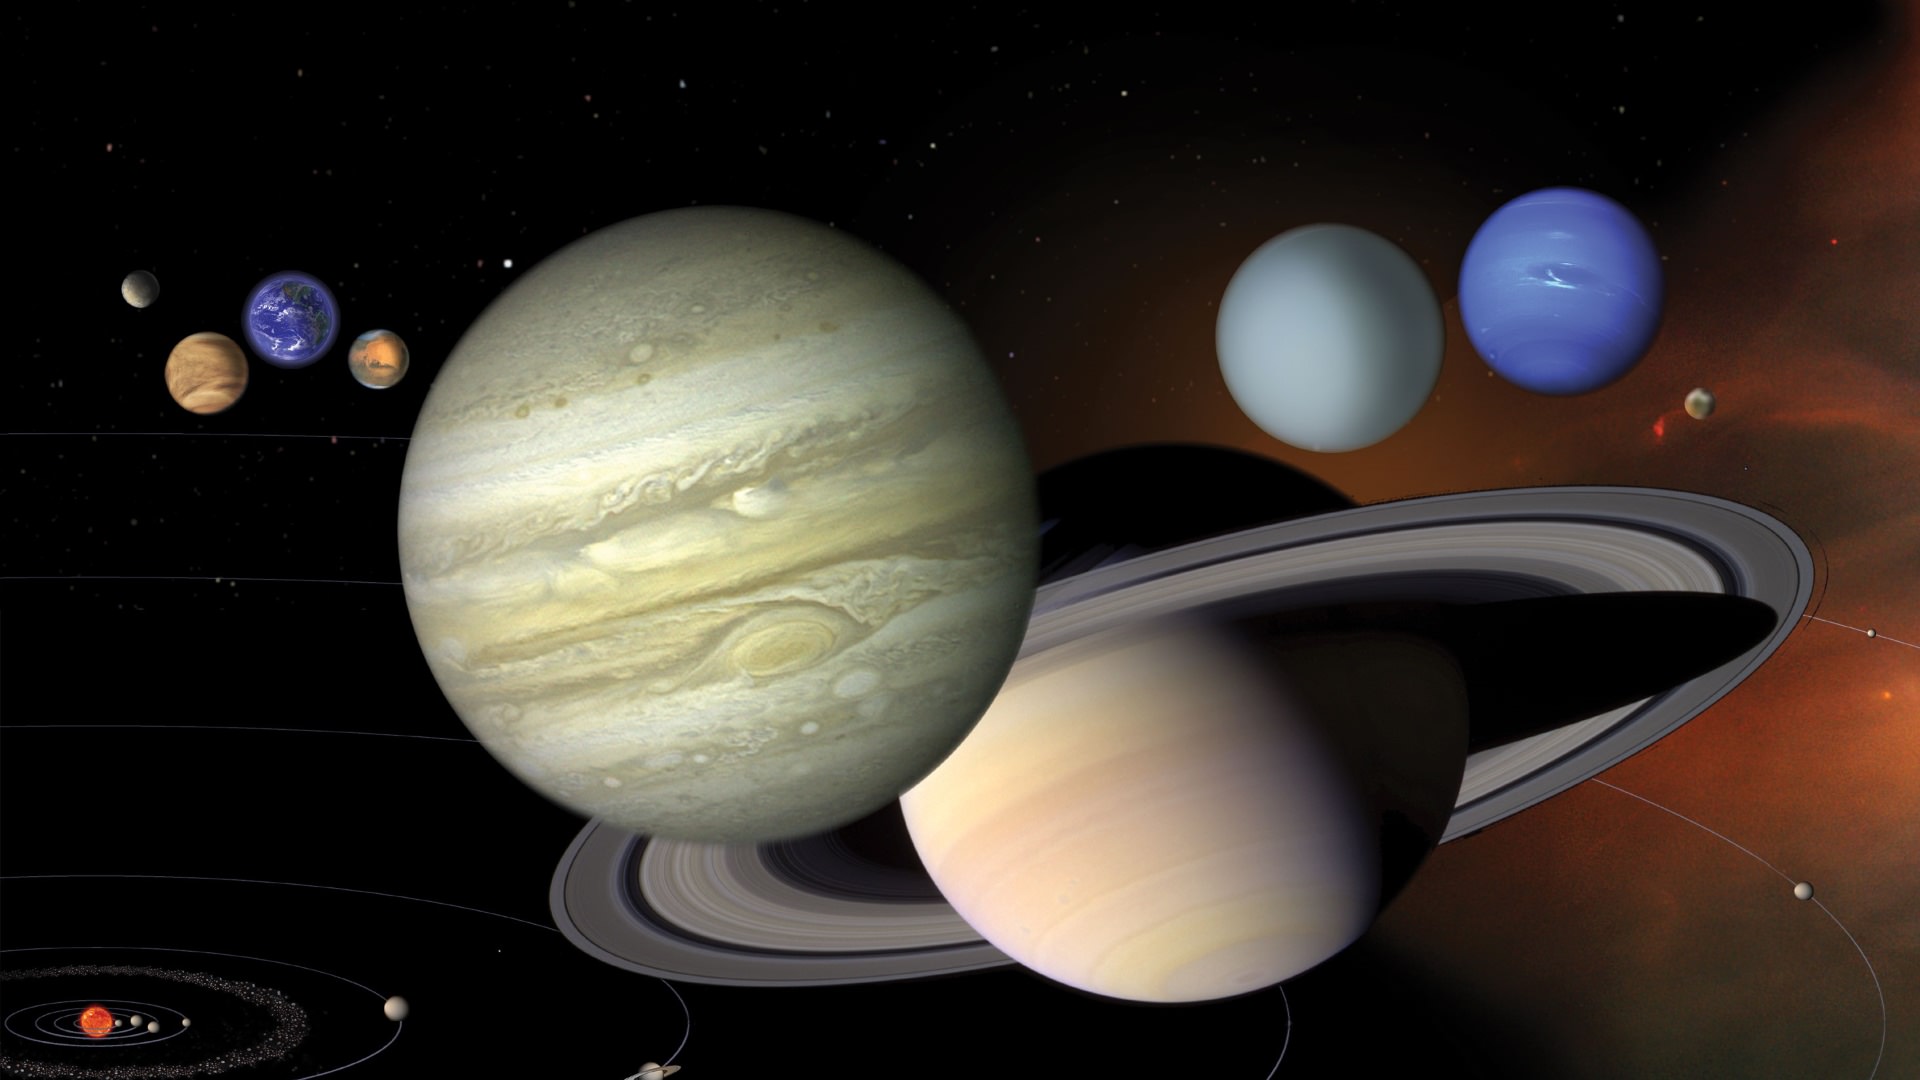 rotation of all the planets